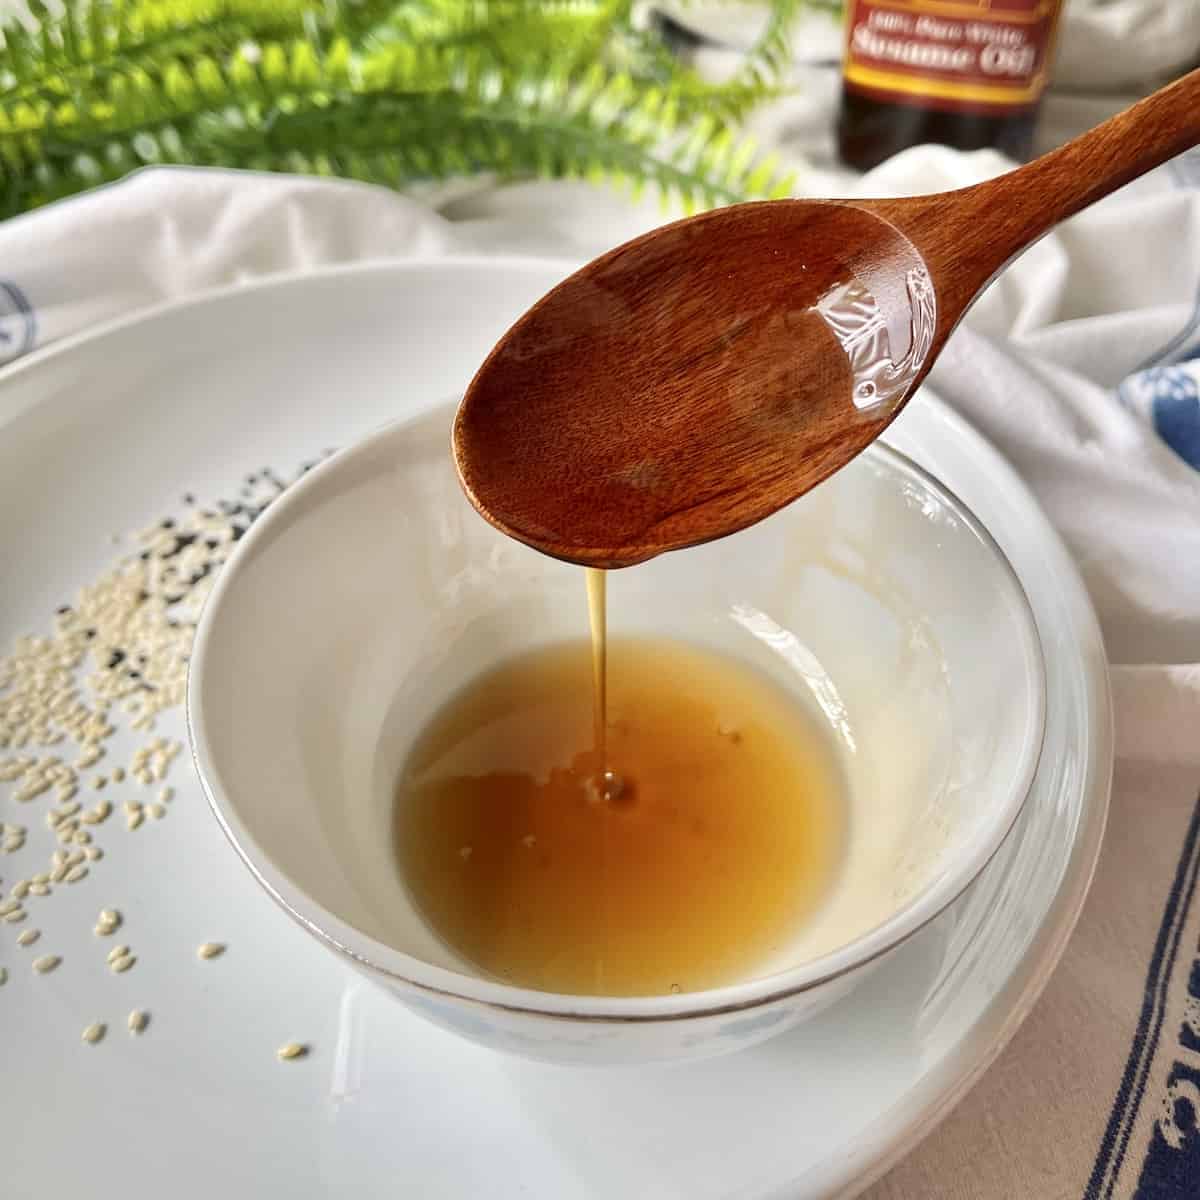 A wooden spoon scooping sesame oil from a white bowl.